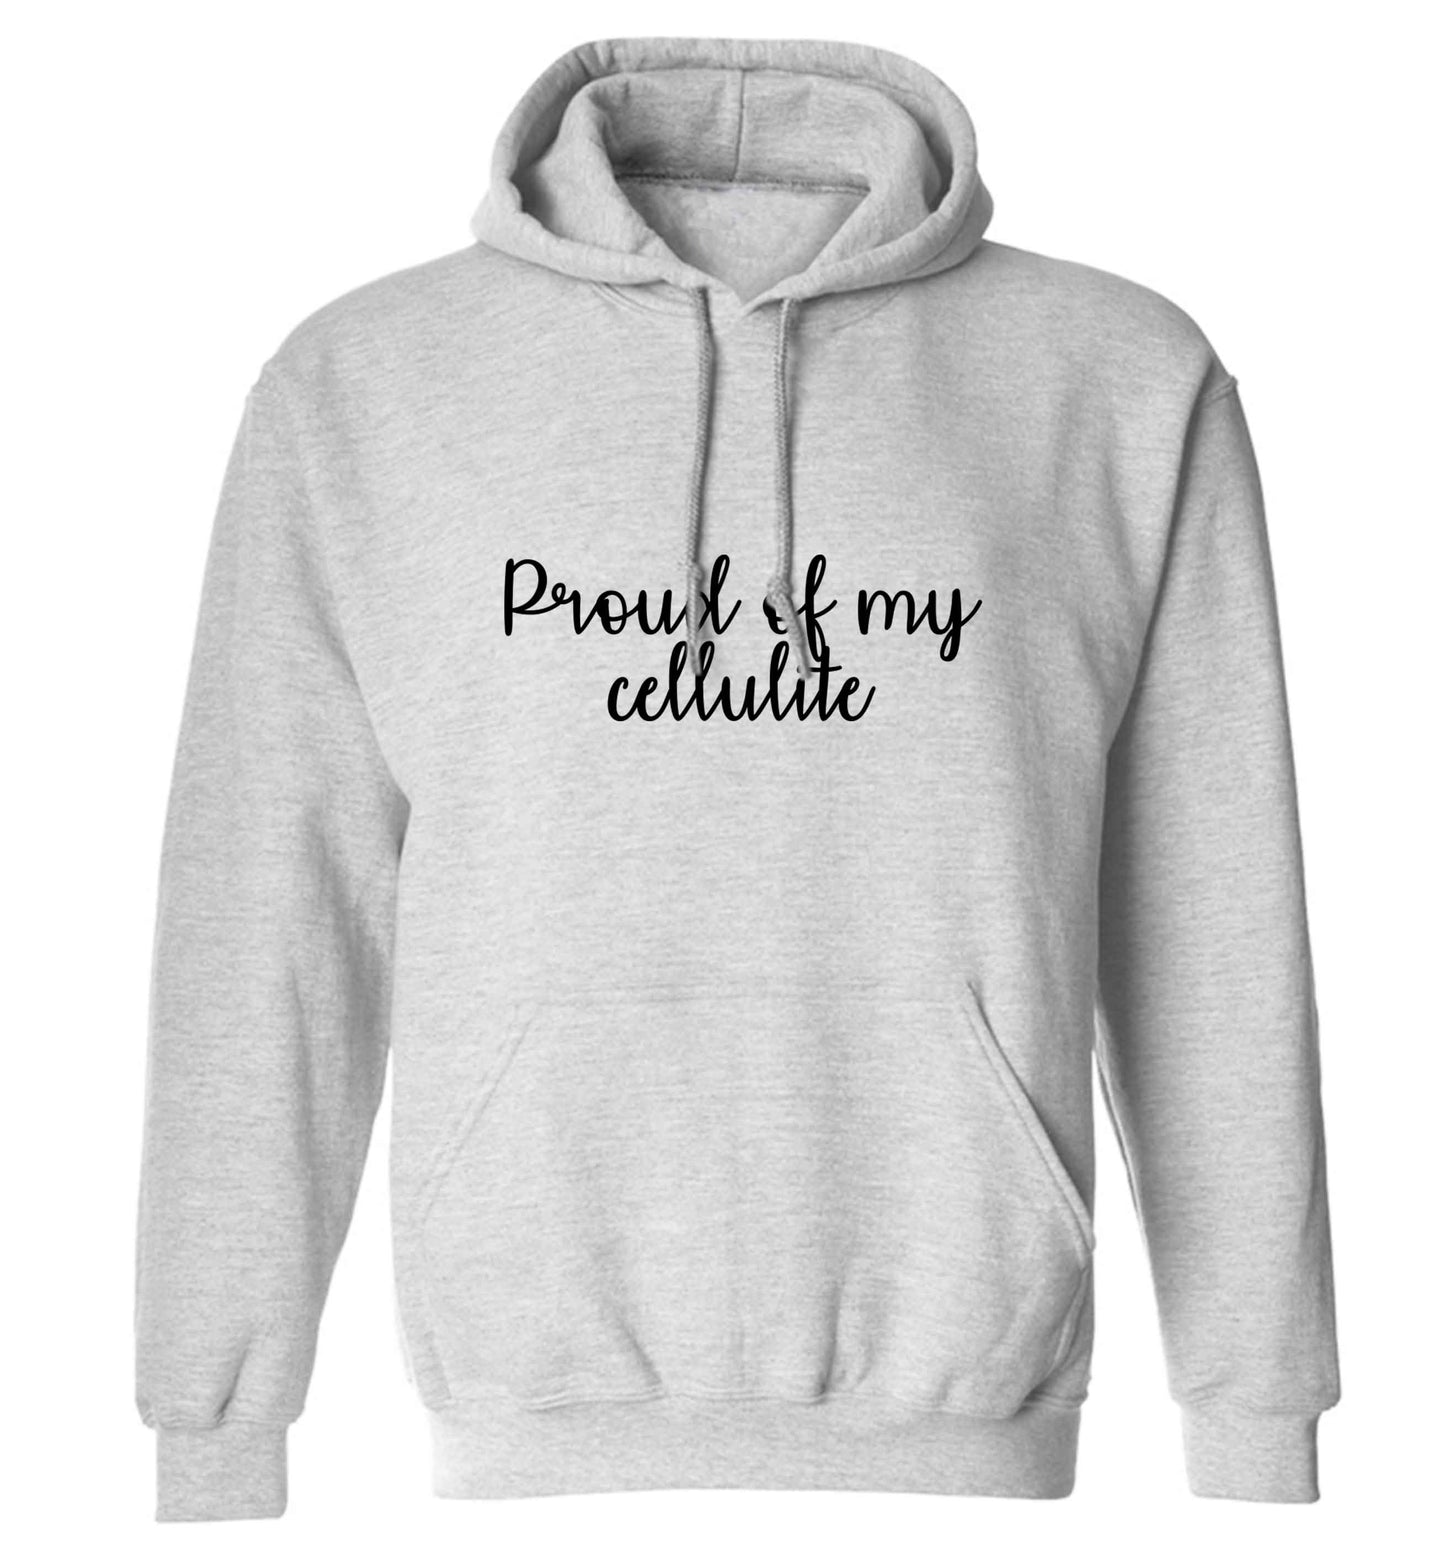 Proud of my cellulite adults unisex grey hoodie 2XL